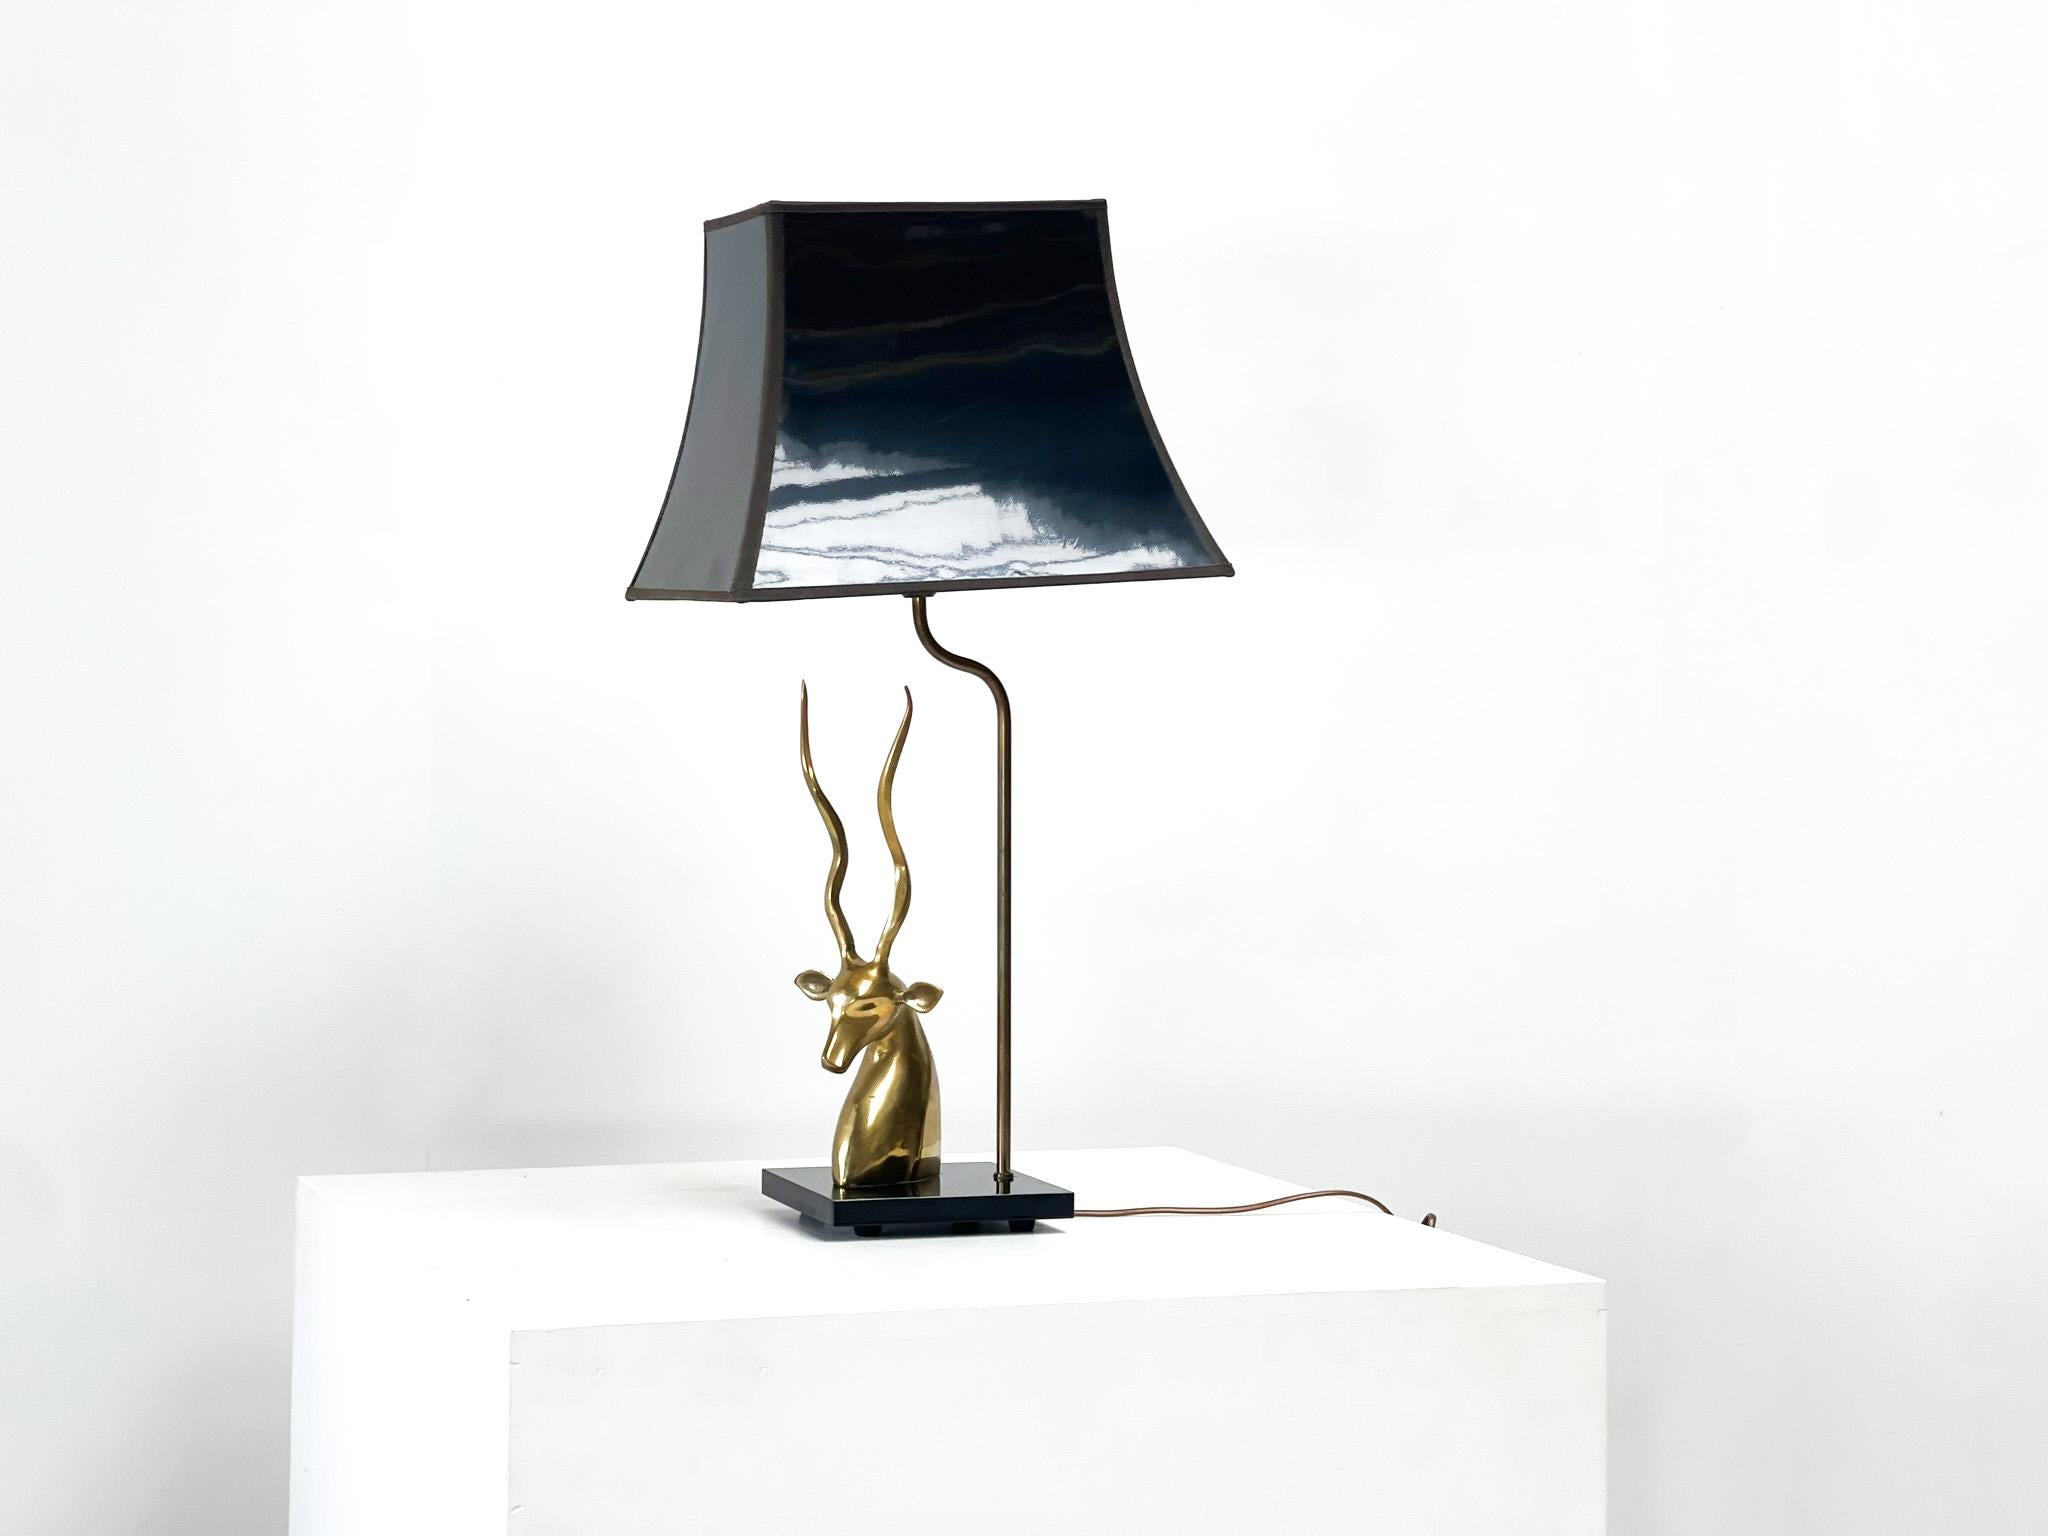 Antilope head table lamp in Brass France 1975
Very nice typical French lamp. The lamp was made in the 1950s by an unknown manufacturer. The elegant lamp has a brass deer head and a wooden base. The lampshade is black plastic. A typical example of